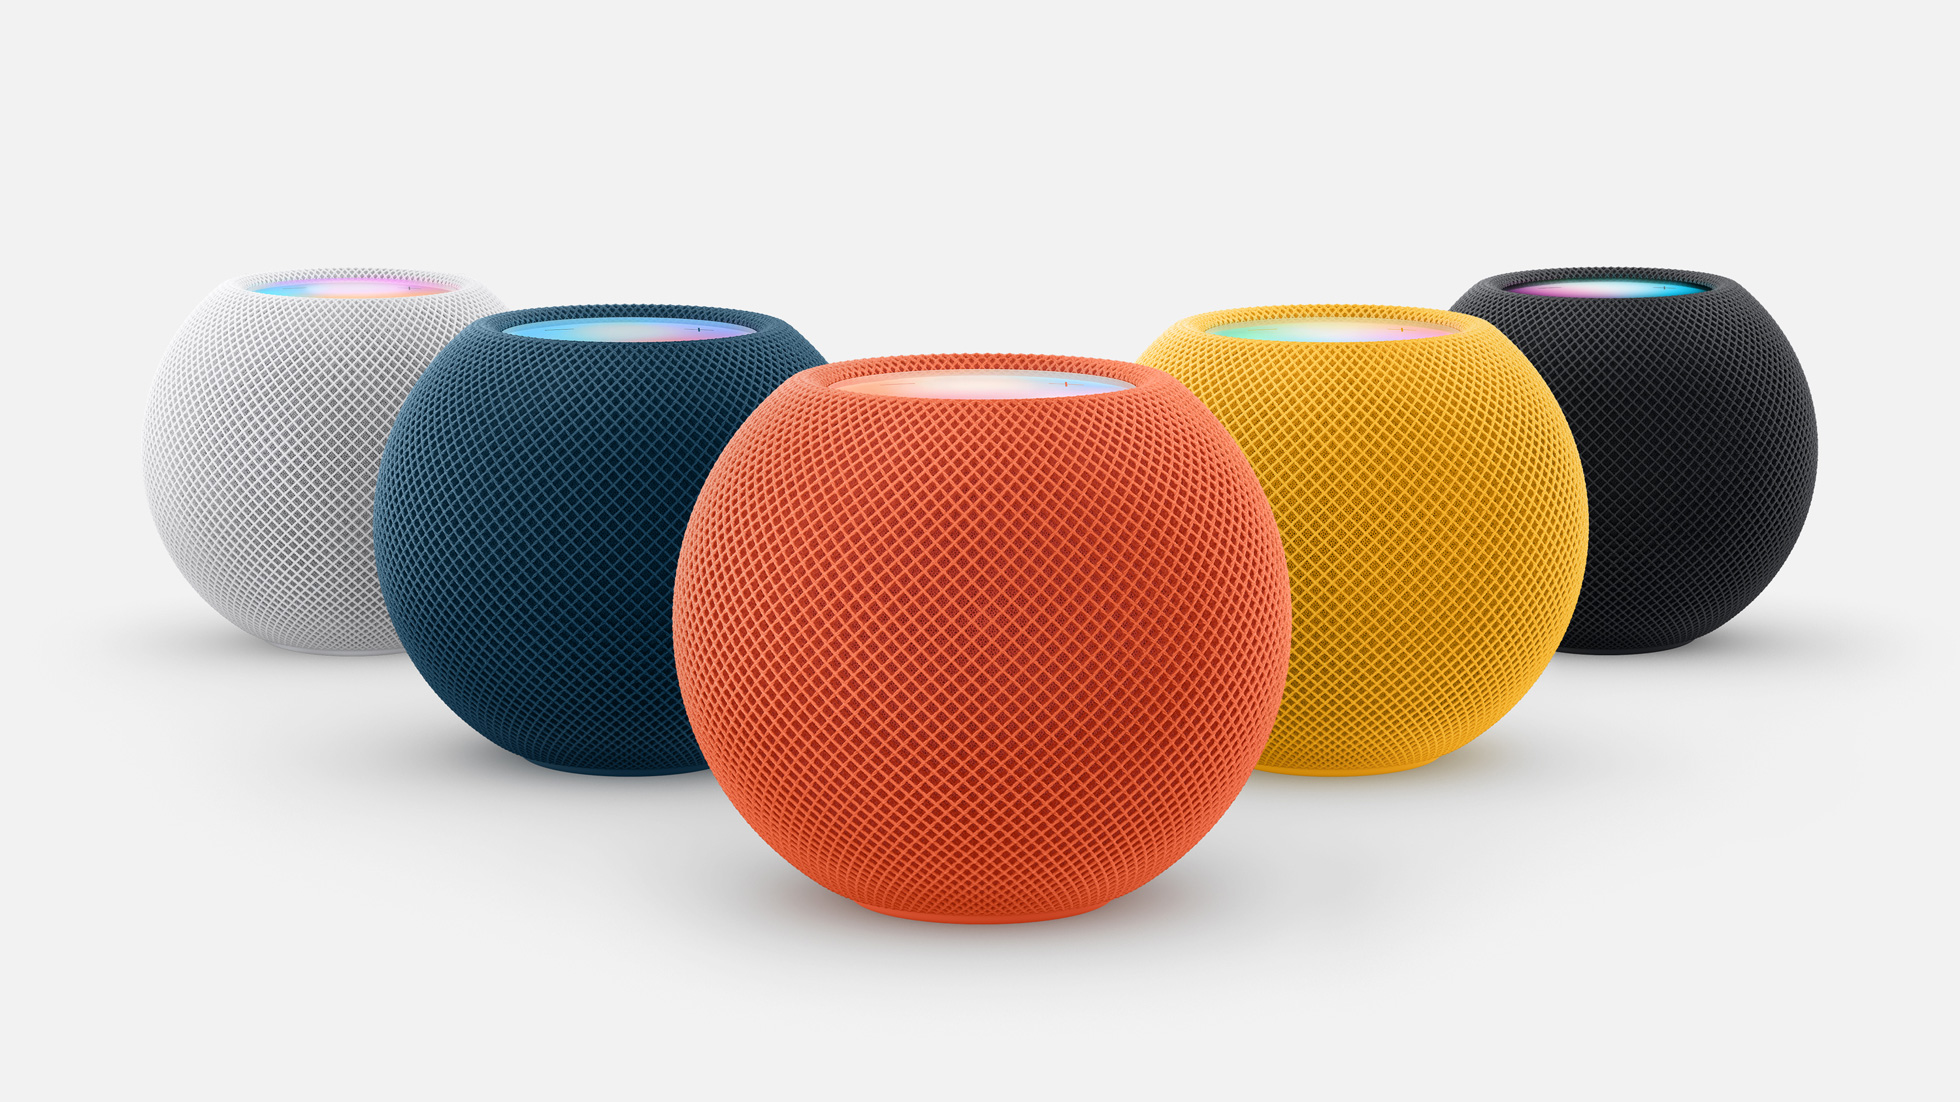 Apple introduce the HomePod mini in three new colors – yellow, orange and blue